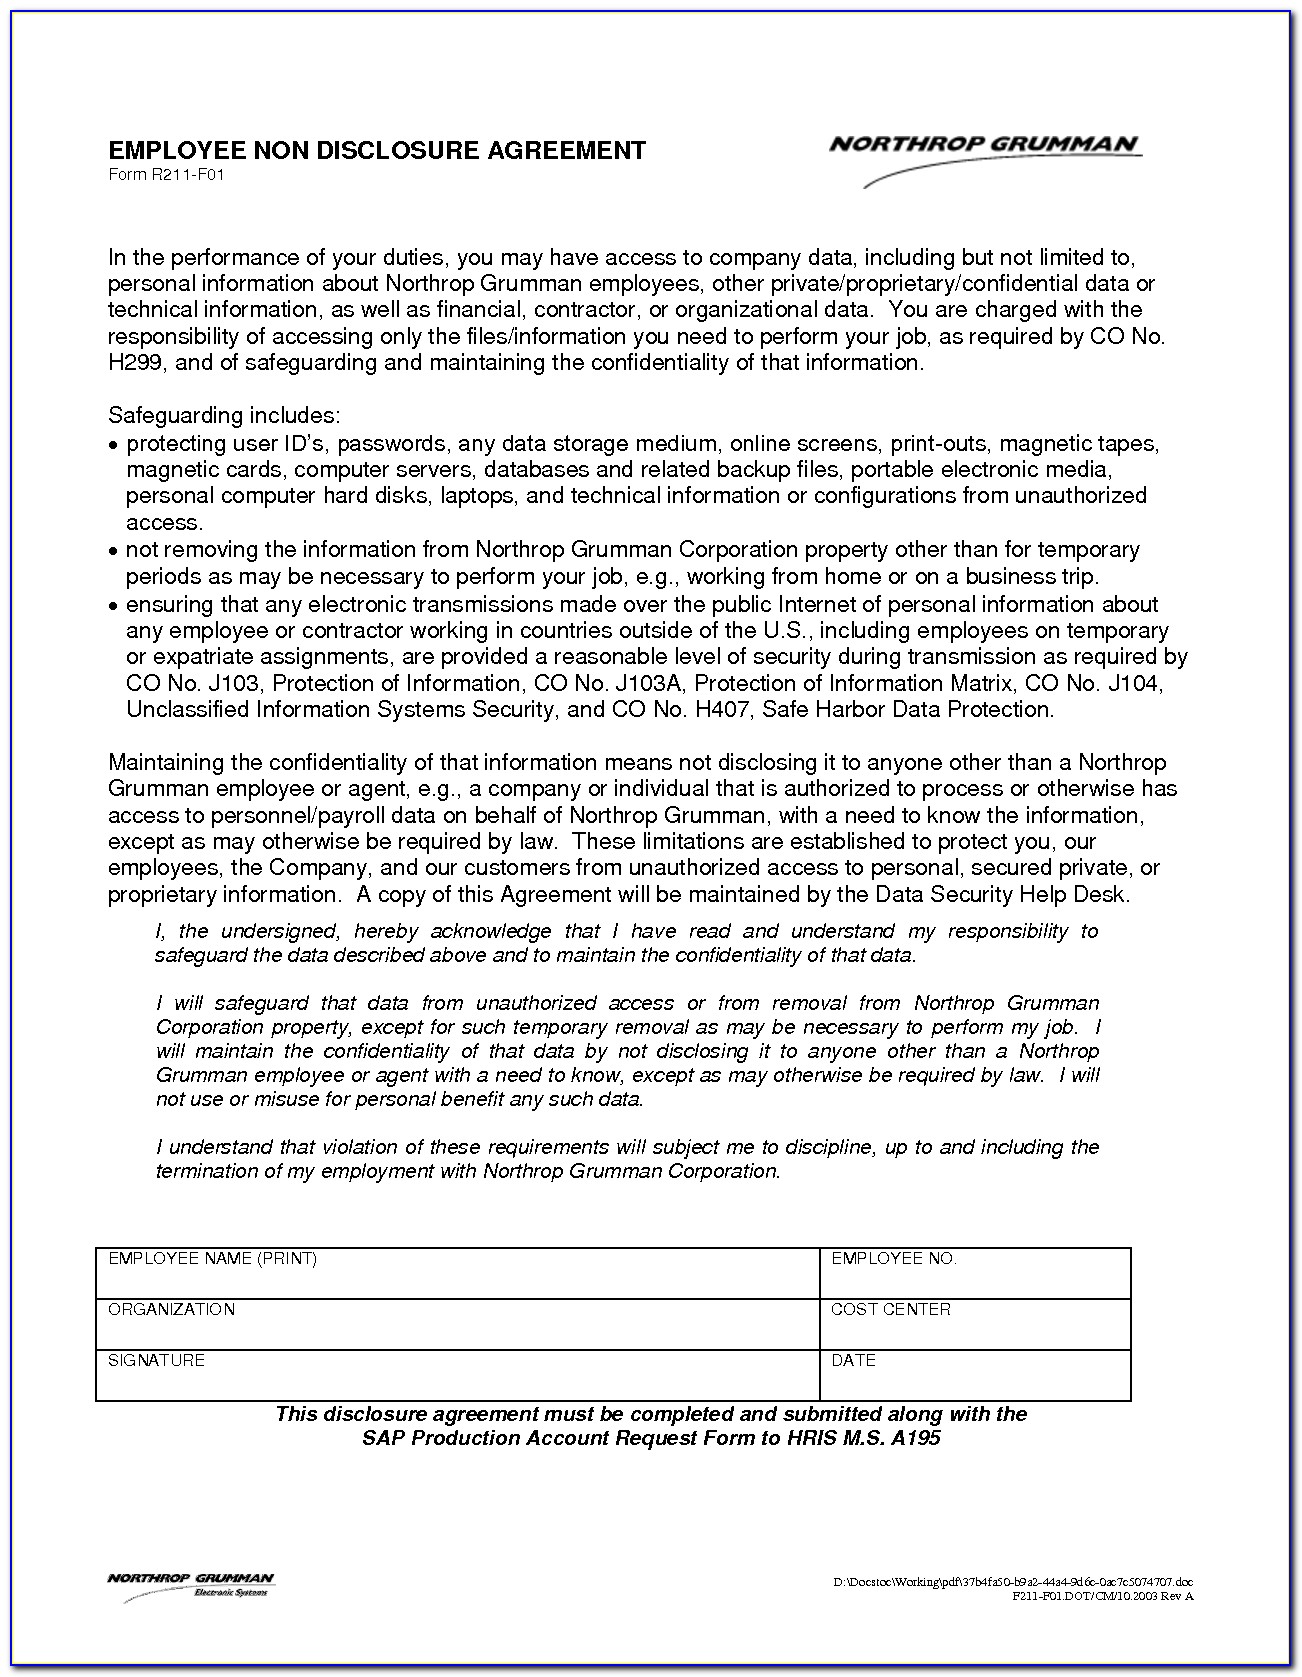 Hipaa Confidentiality Statement For Fax Cover Sheet